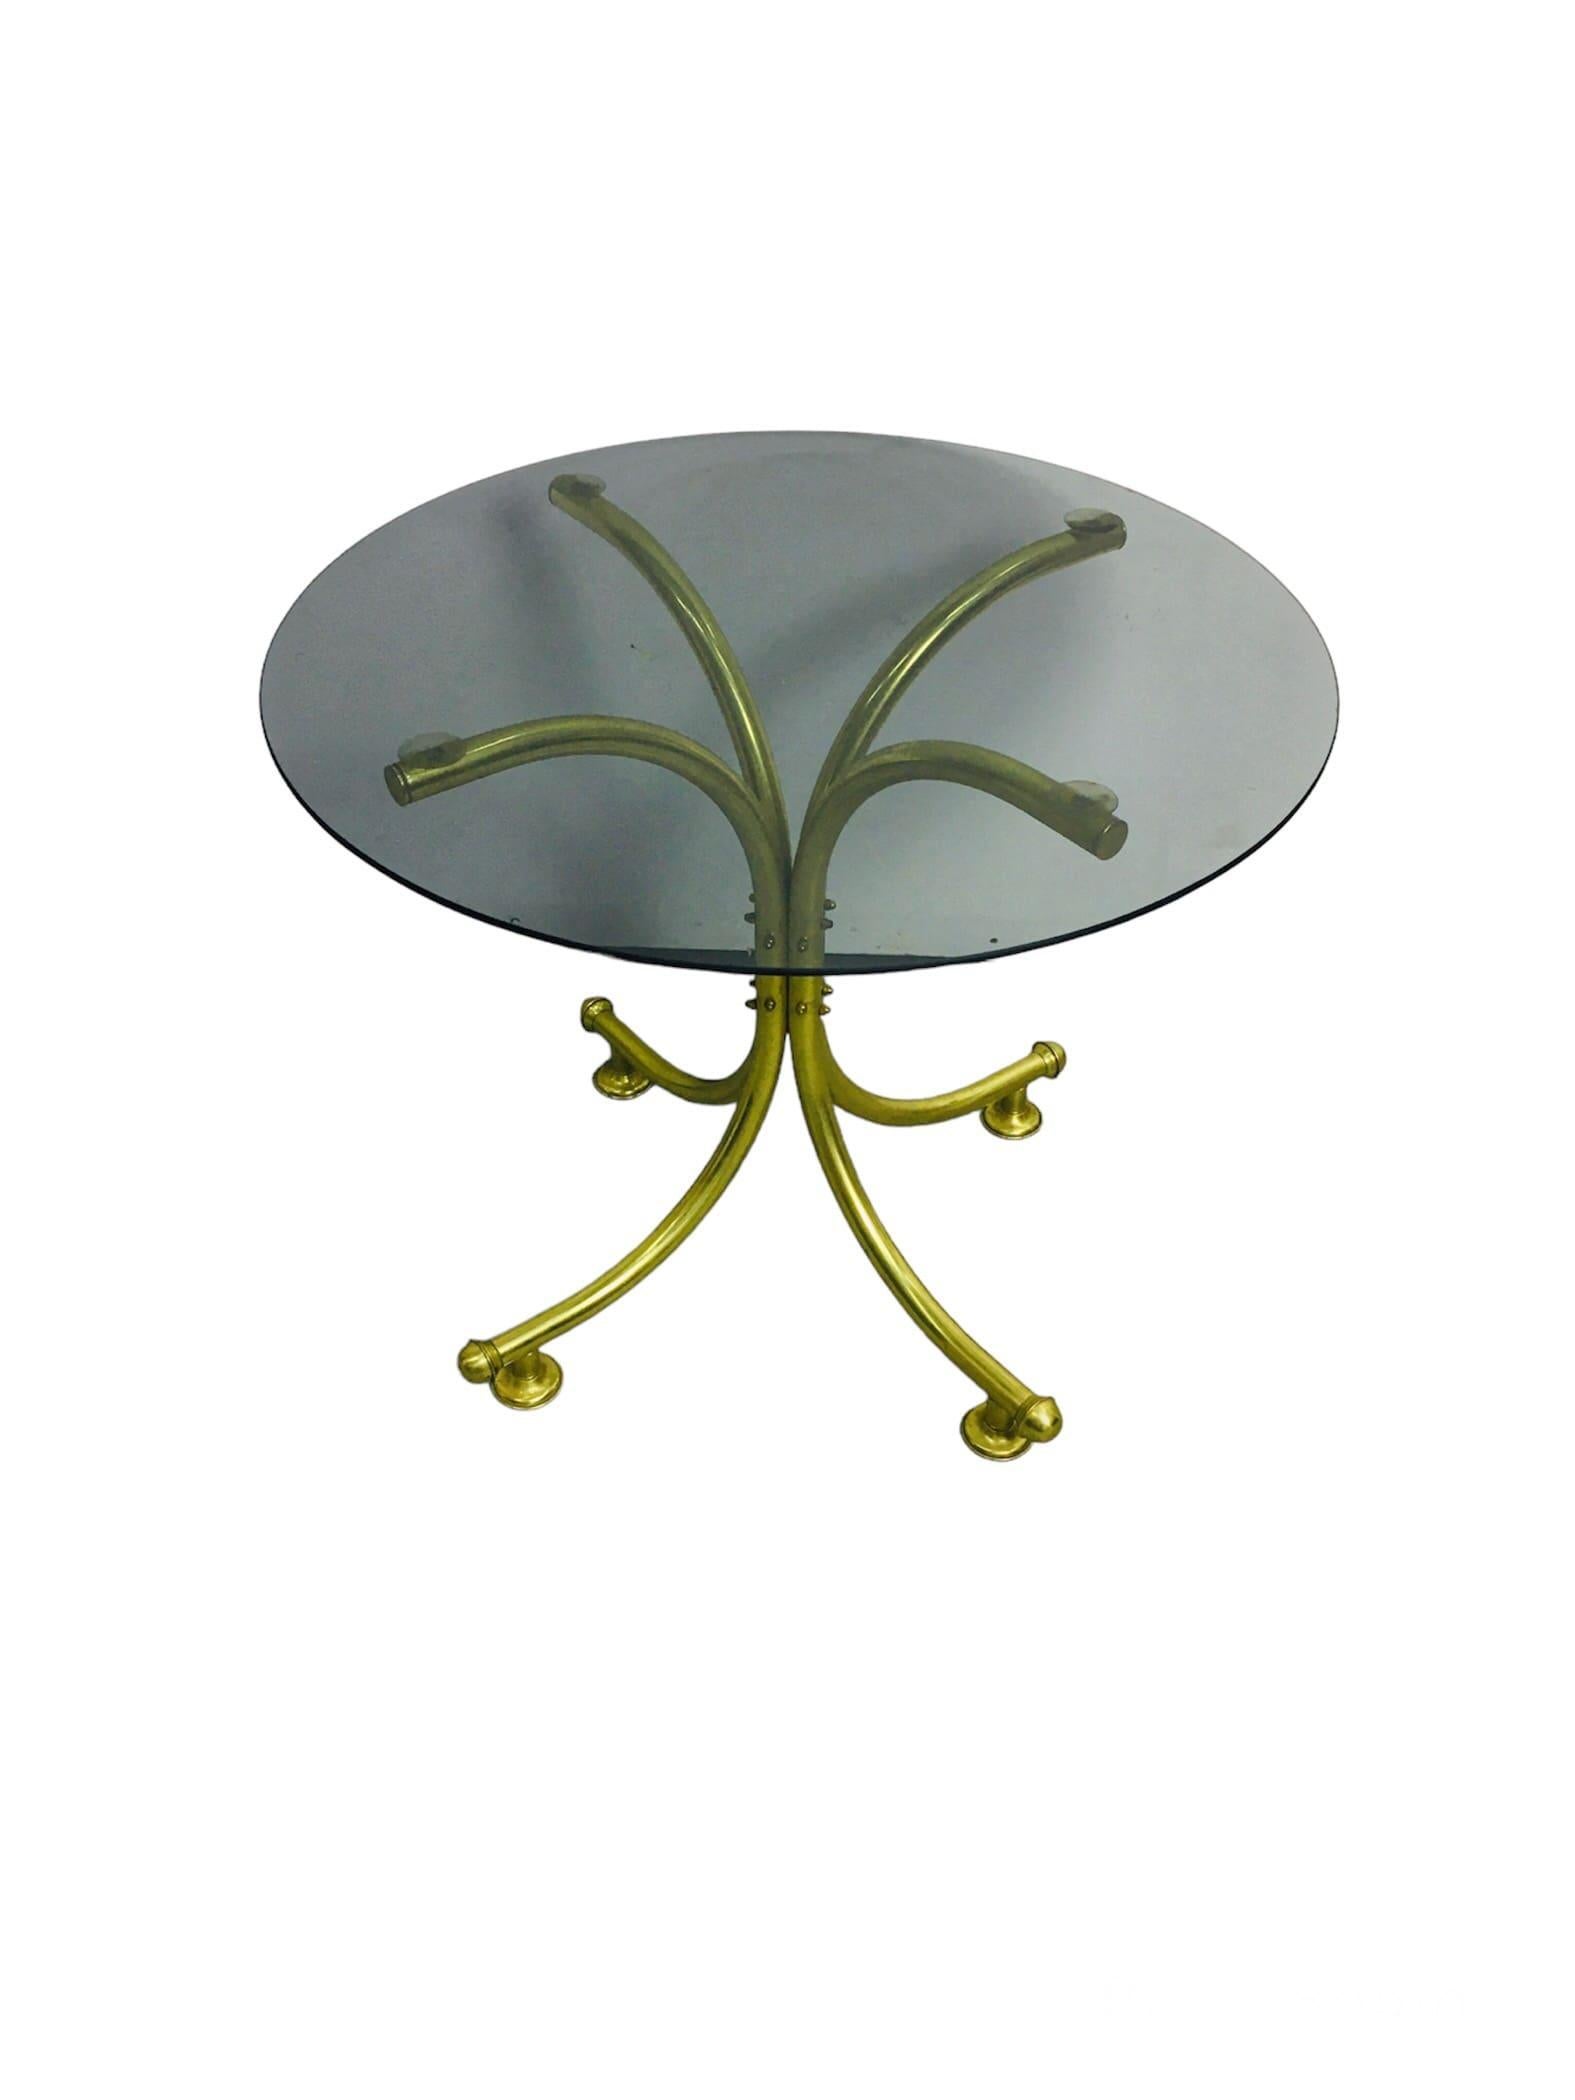 Unique coffee table with bent copper legs and darkened circular tempered glass tabletop, from the 60s and 70s. This quality piece is available in beautiful condition. A truly decorative piece with shiny brass legs. Available in good condition,